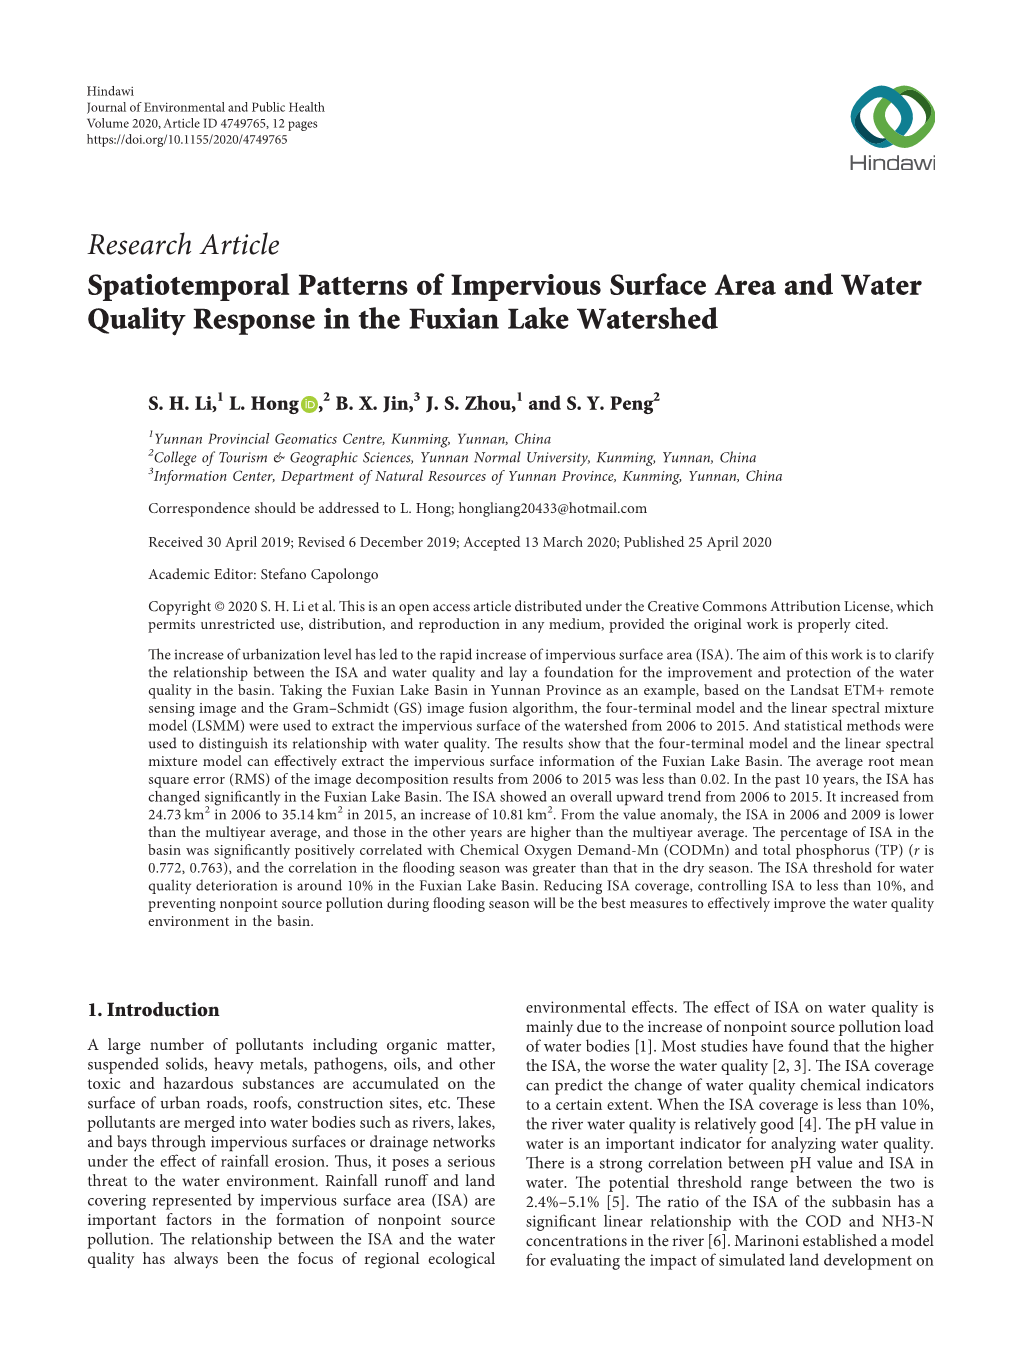 Spatiotemporal Patterns of Impervious Surface Area and Water Quality Response in the Fuxian Lake Watershed